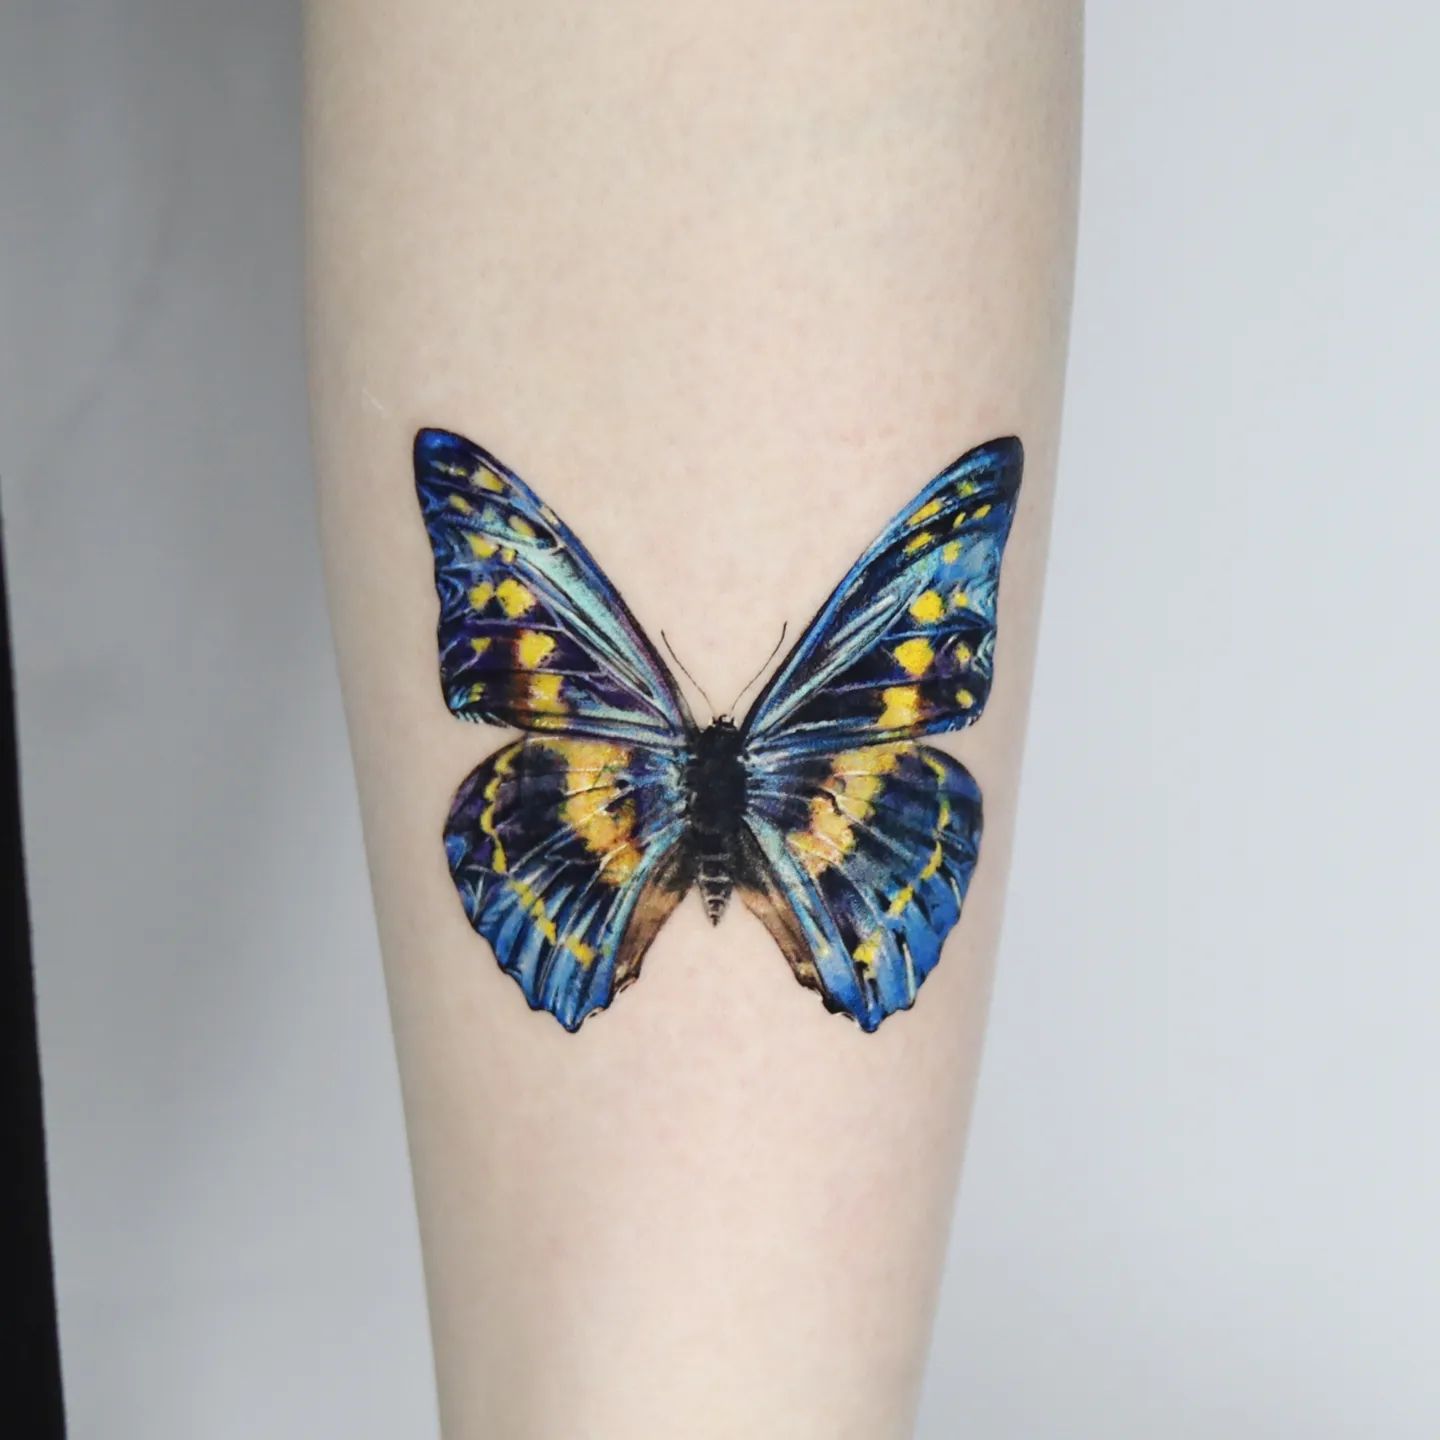 Blue and yellow butterfly tattoo